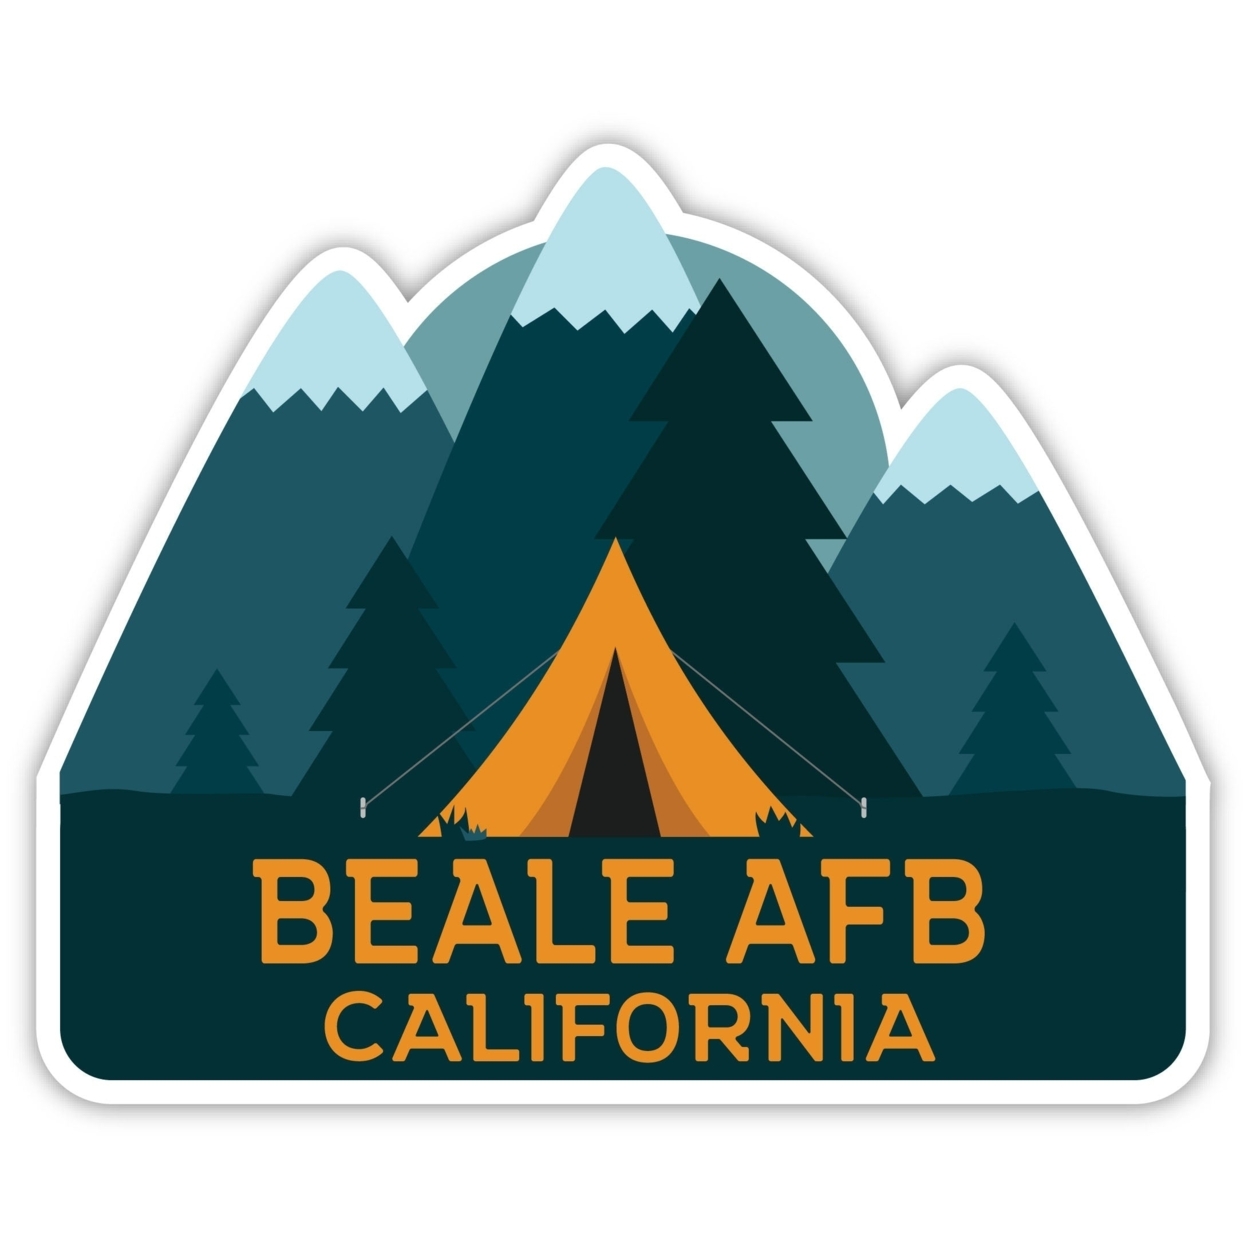 Beale AFB California Souvenir Decorative Stickers (Choose Theme And Size) - 4-Pack, 6-Inch, Tent